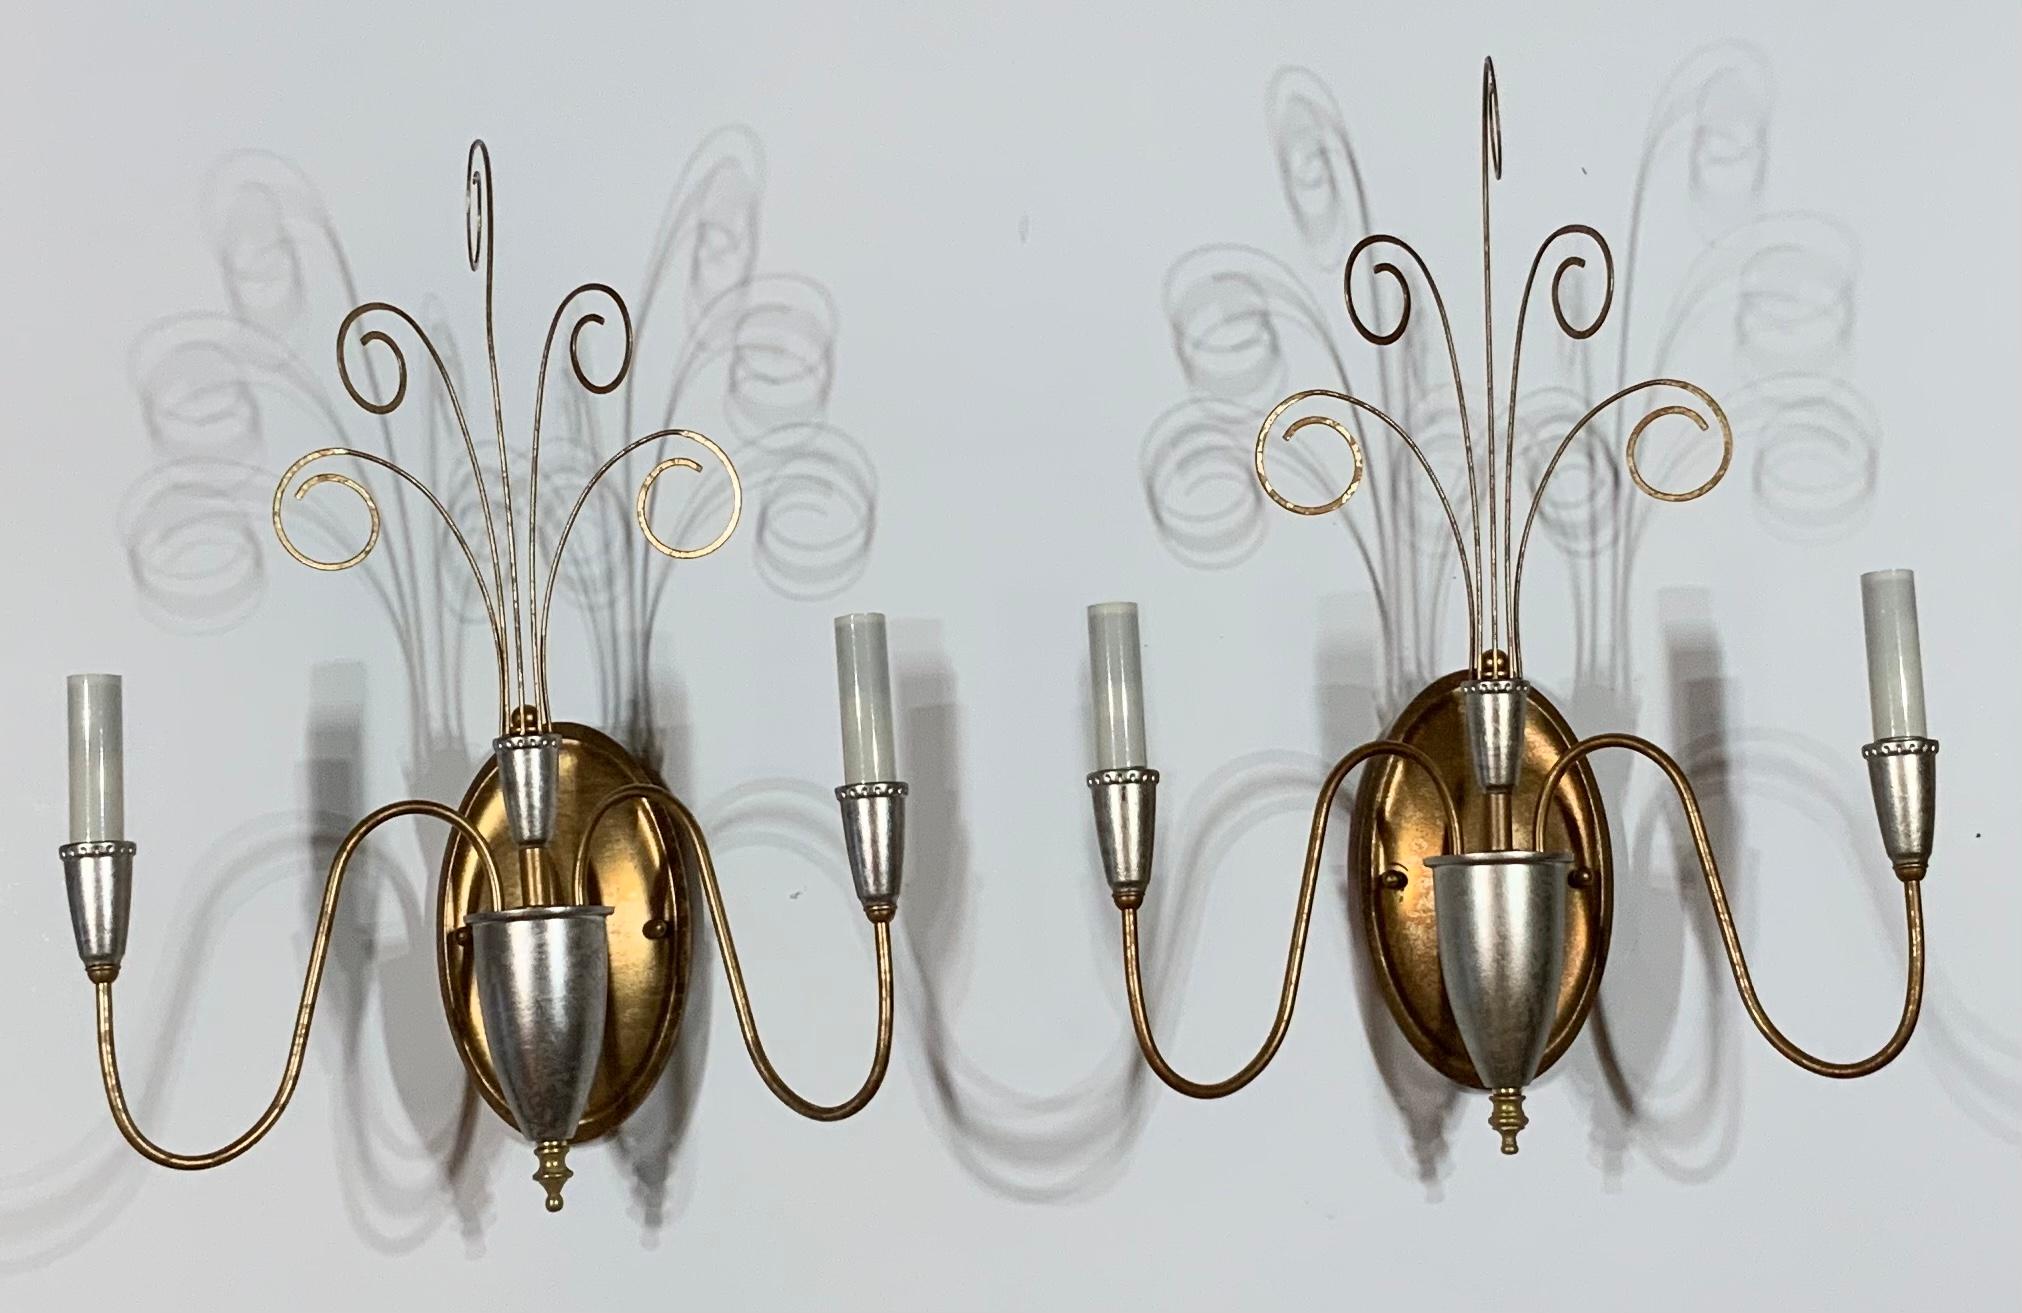 Elegant pair of wall sconces made of metal, painted in silver and gold, with two 60/watt light each sconce
Electrified and ready to use. Beautiful and clean cut pair for the wall.
One more pair is posted.
    